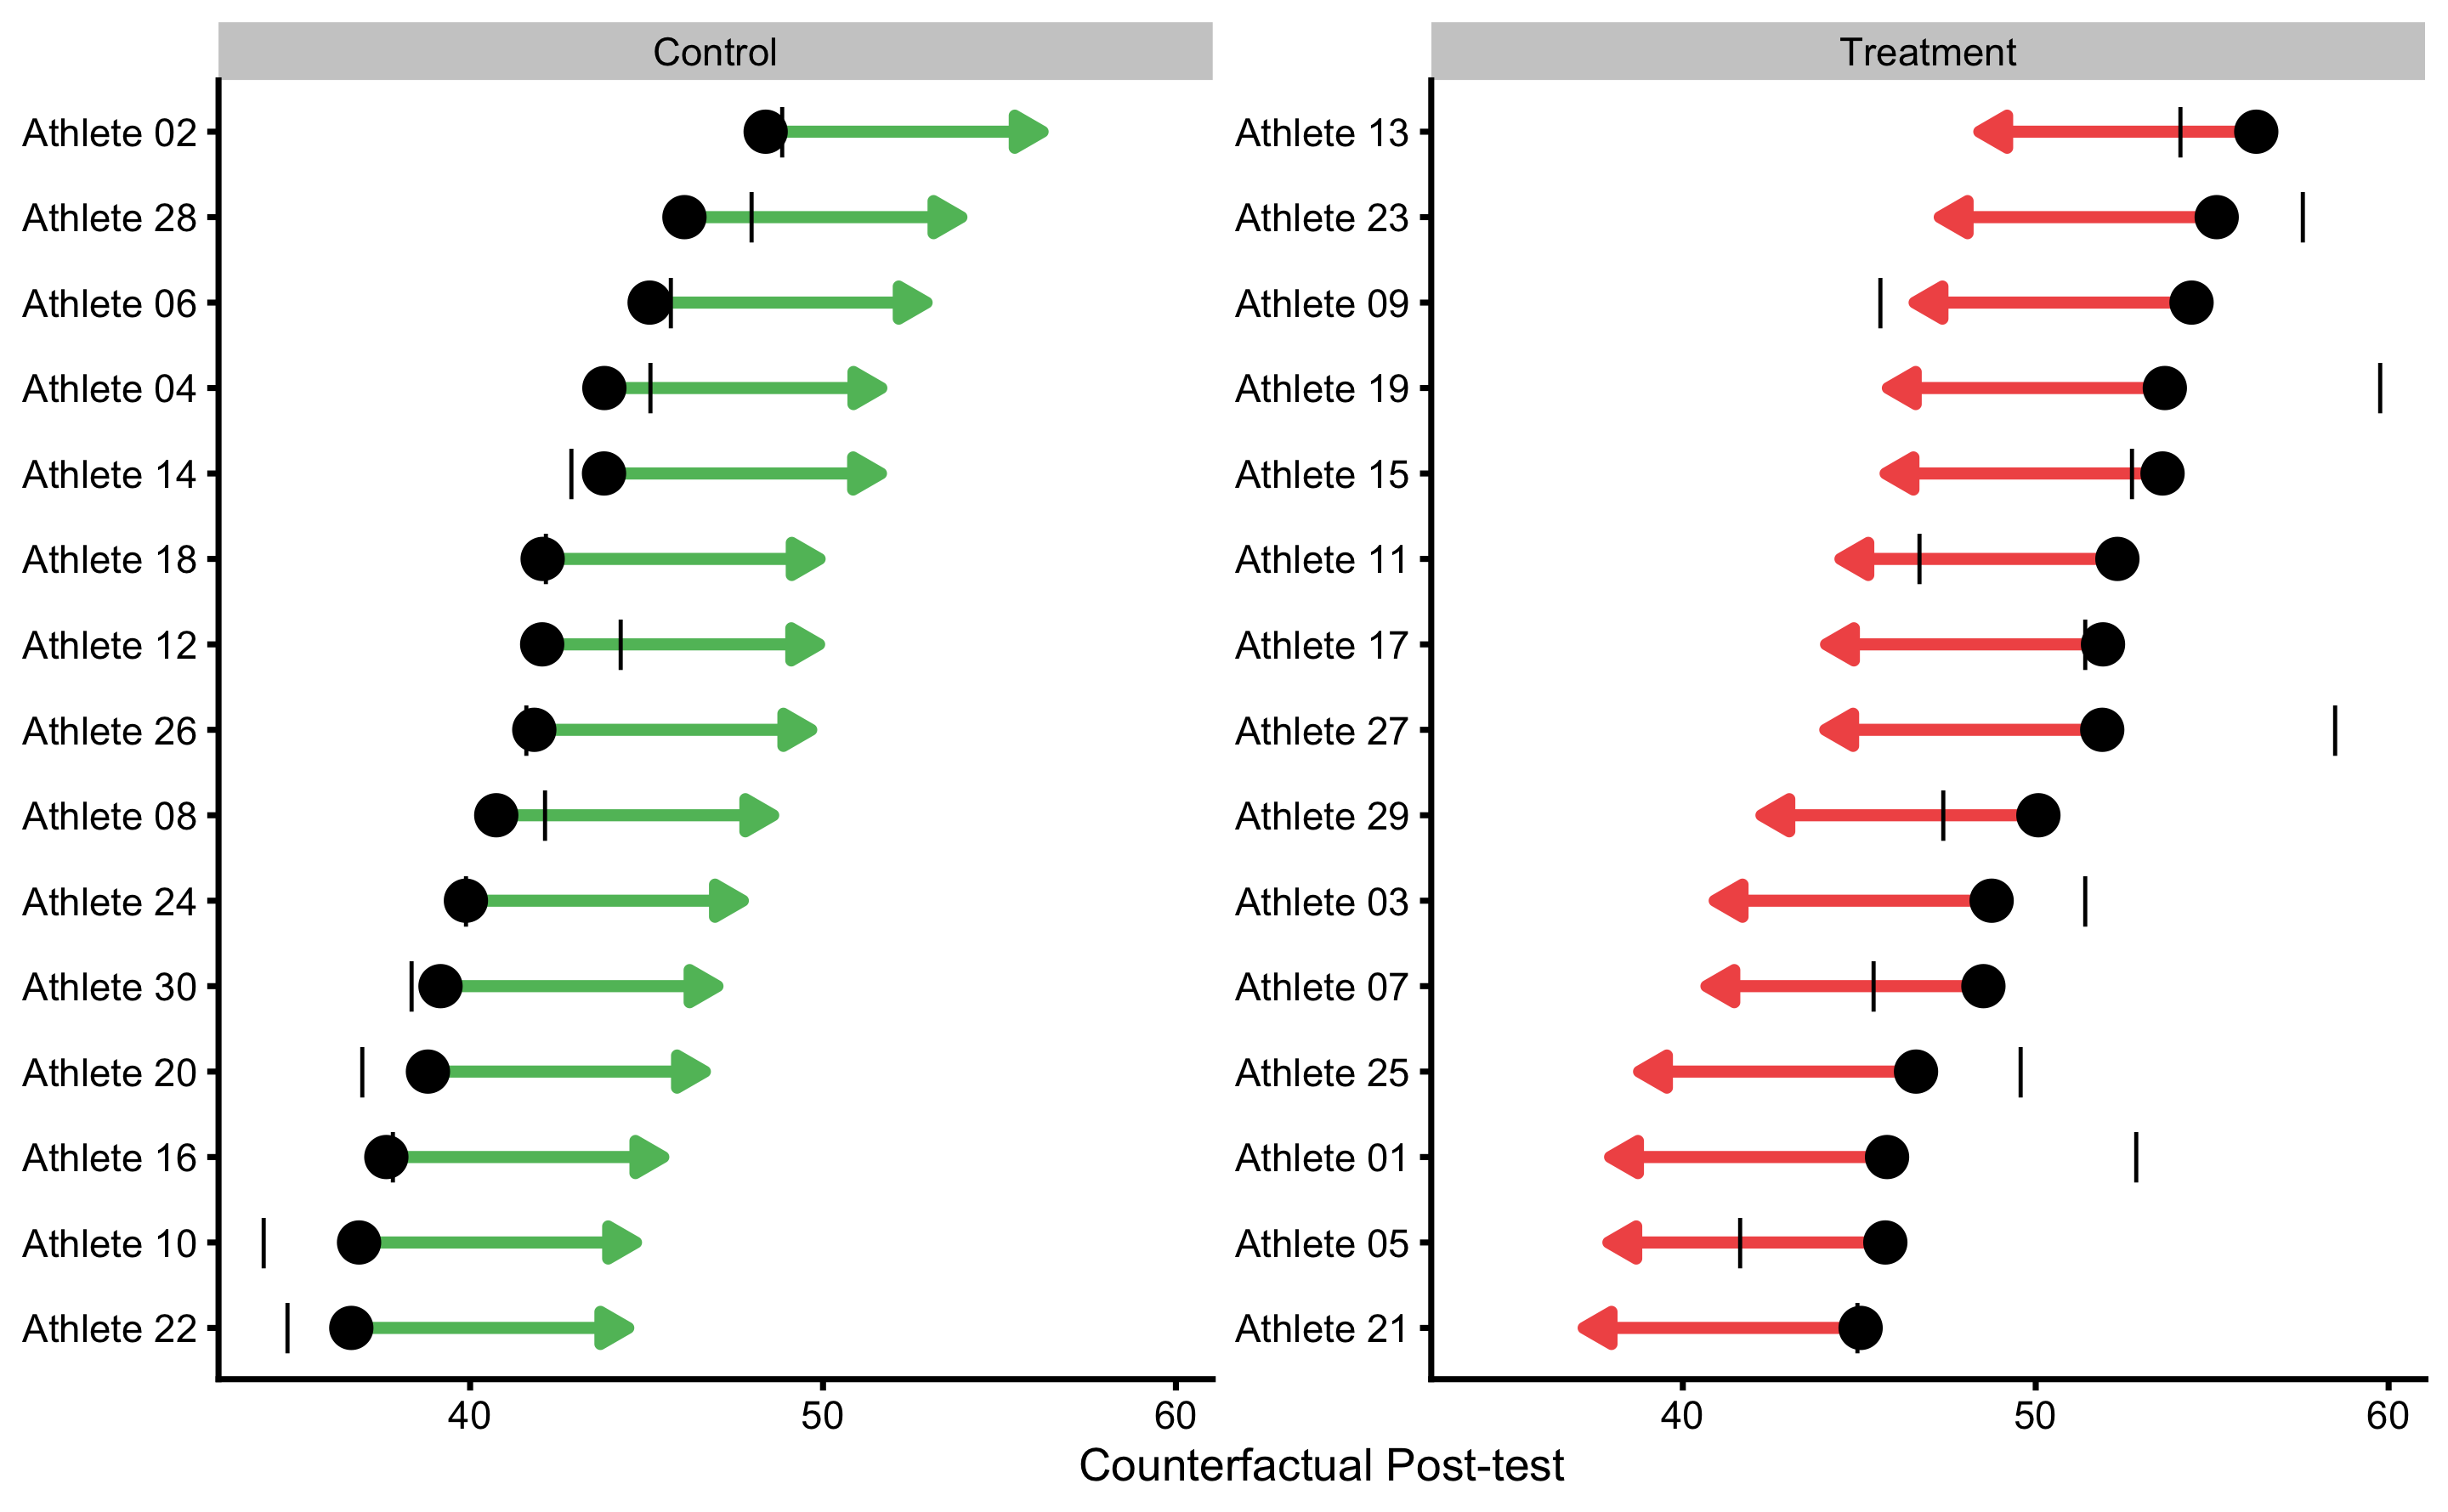 Individual counterfactual prediction when the Group changes. This way we can estimate model counterfactual predictions when the treatment changes (i.e. Controls receive treatment, and Treatment doesn’t receive treatment). Arrows thus represent model predicted Individual Treatment Effects (pITE). Arrows are color coded based on the magnitude of the effect using defined SESOI (±2.5cm in this example): grey for equivalent magnitude, green for lower magnitude, and red for higher magnitude. Vertical line indicates observed Post-test scores.